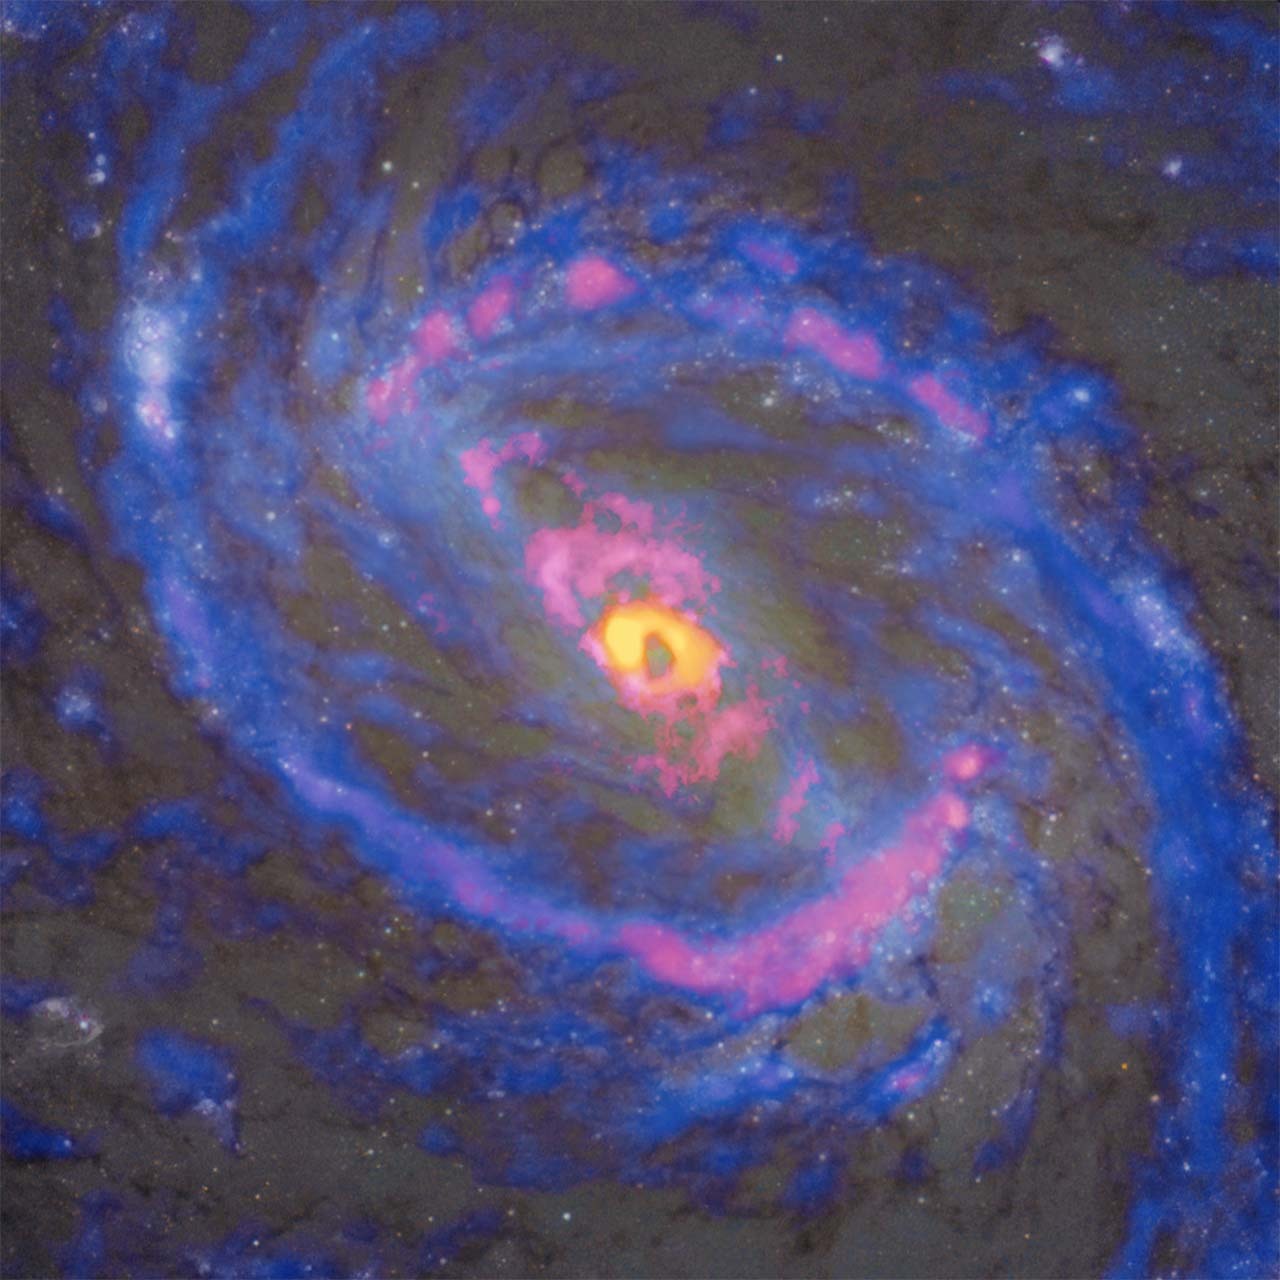 The spiral galaxy Messier 77 (NGC 1068), as observed by ALMA and the Hubble Space Telescope. Hydrogen cyanide isotopes (H13CN), shown in yellow, are found only around the black hole at the center. Cyanide radicals (CN), shown in red, appear not only in the center and a large-scale ring-shaped gas structure, but also along the bipolar jets extending from the center towards the northeast (upper left) and southwest (lower right). Carbon monoxide isotopes (13CO), shown in blue, avoid the central region. (Credit: ALMA (ESO/NAOJ/NRAO), NASA/ESA Hubble Space Telescope, T. Nakajima et al.)